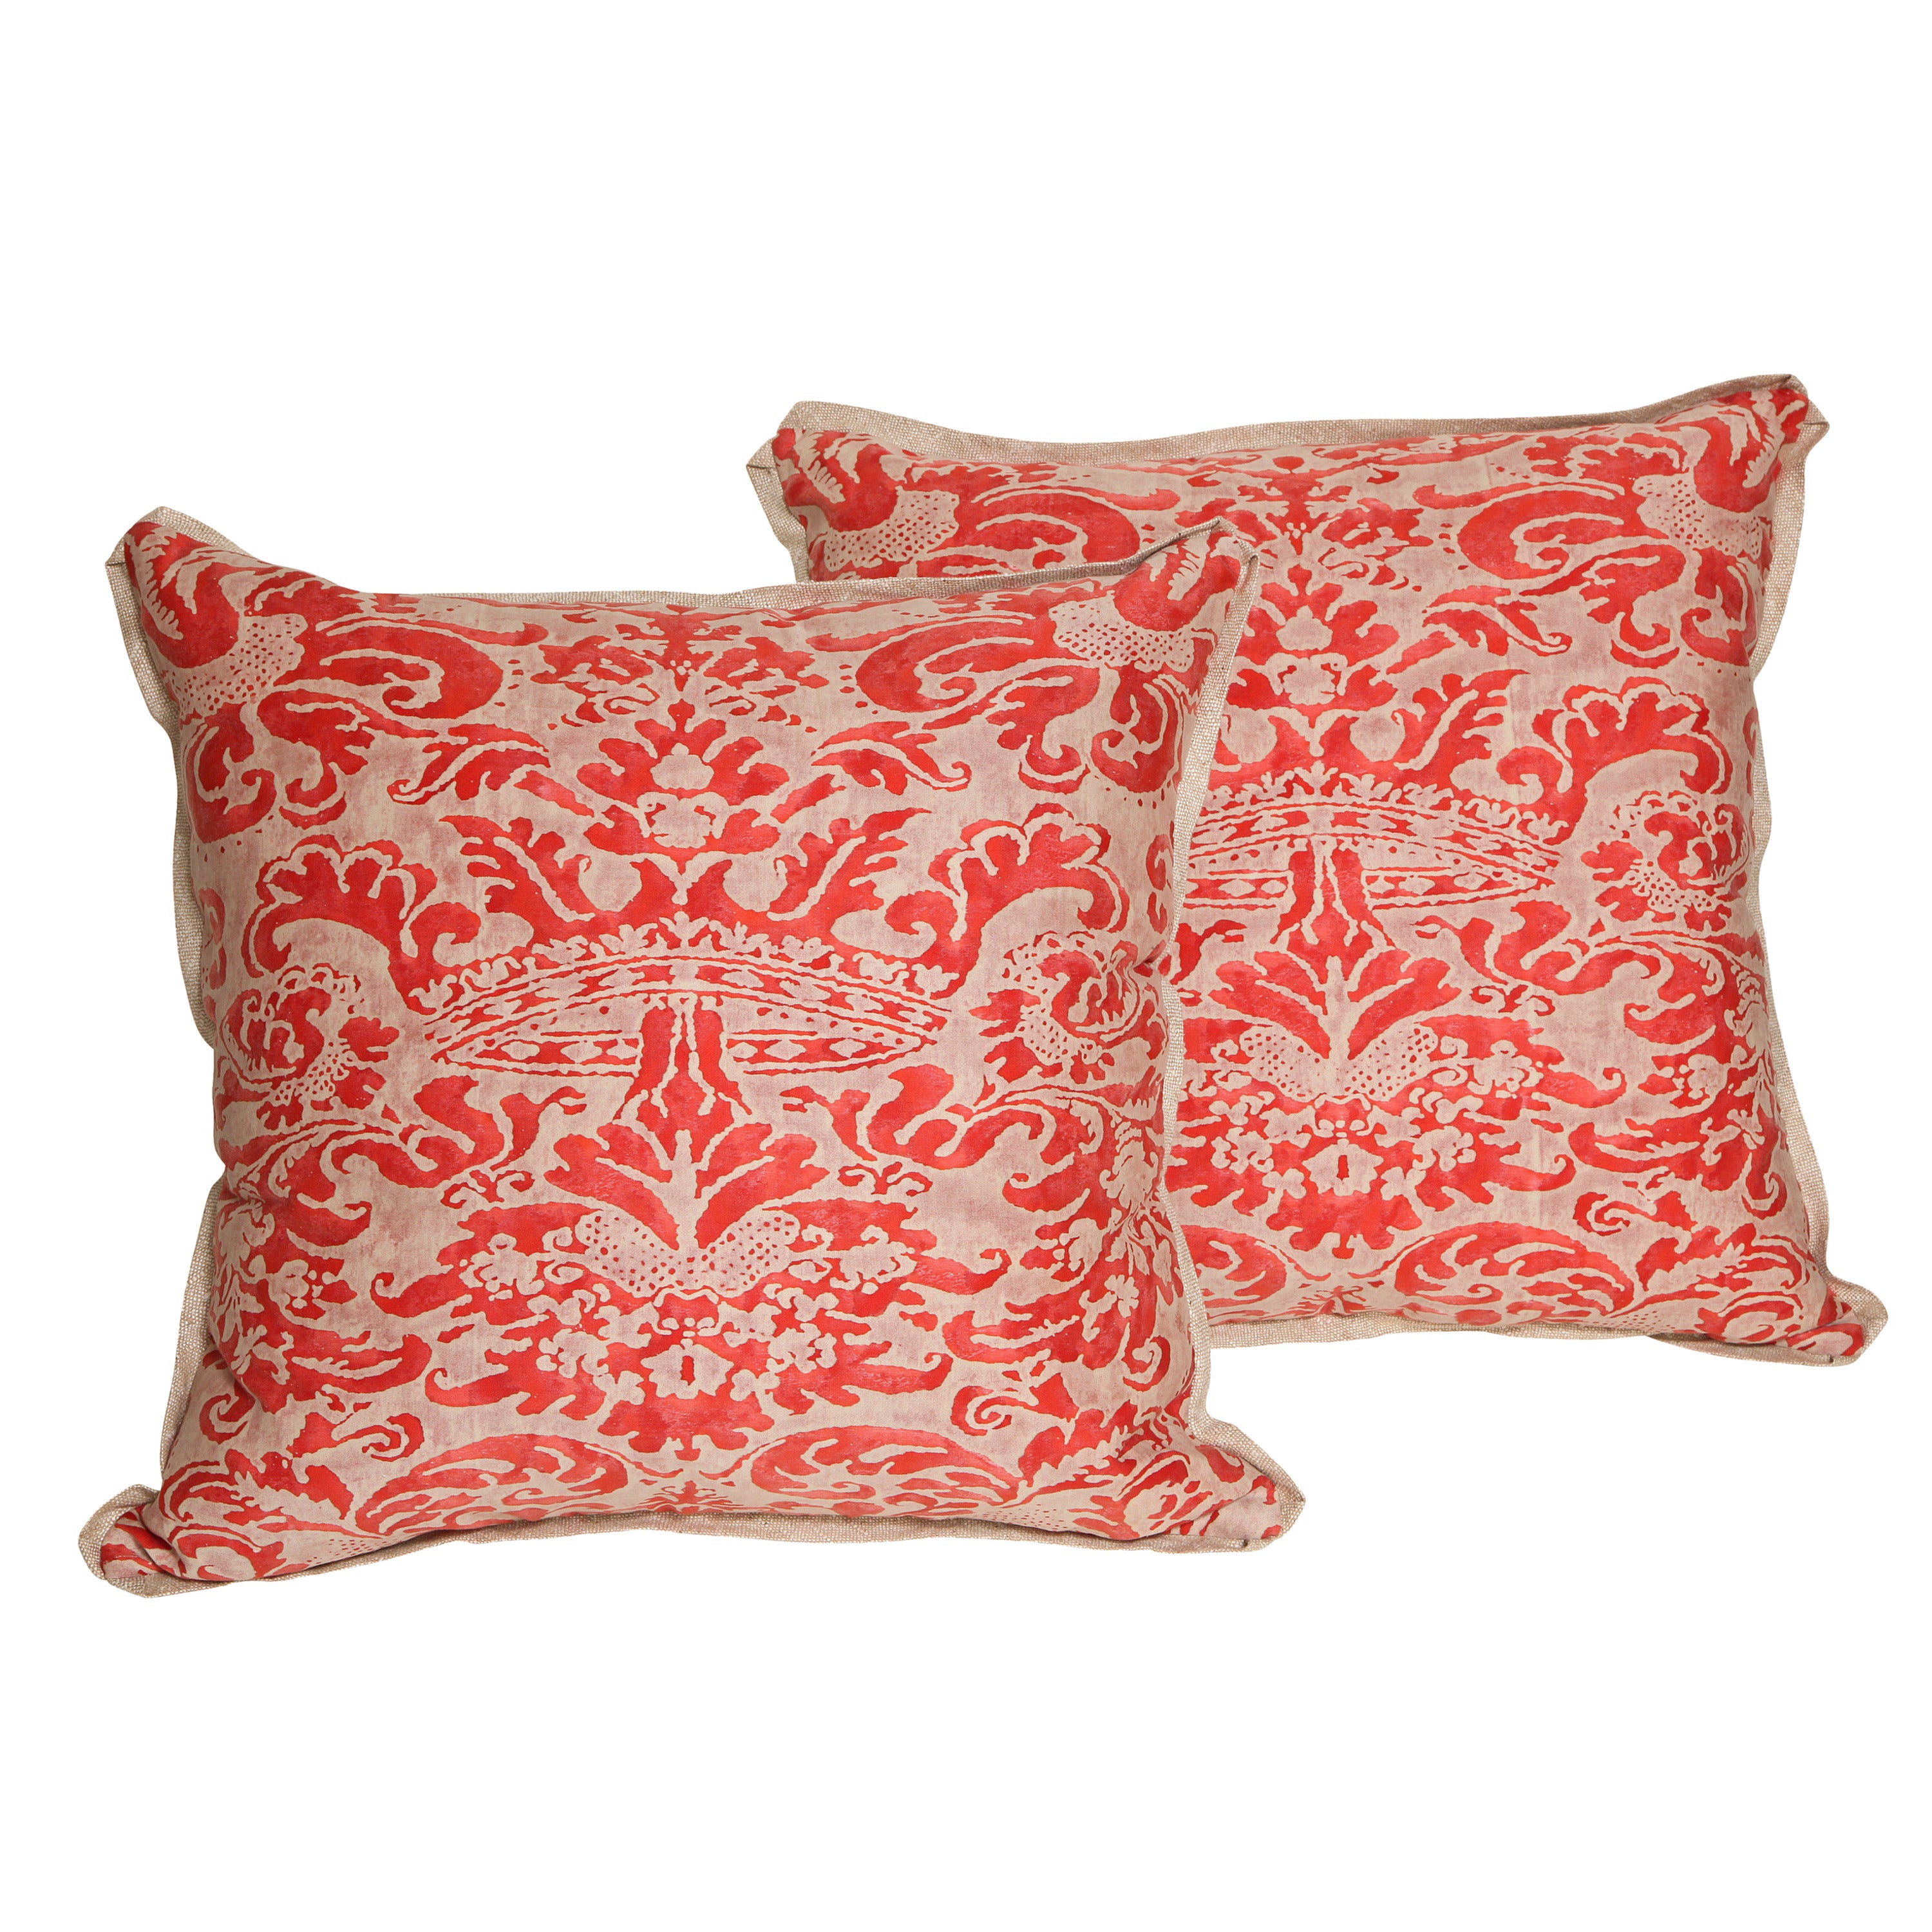 A Pair of Fortuny Fabric Cushions in the Corone Pattern